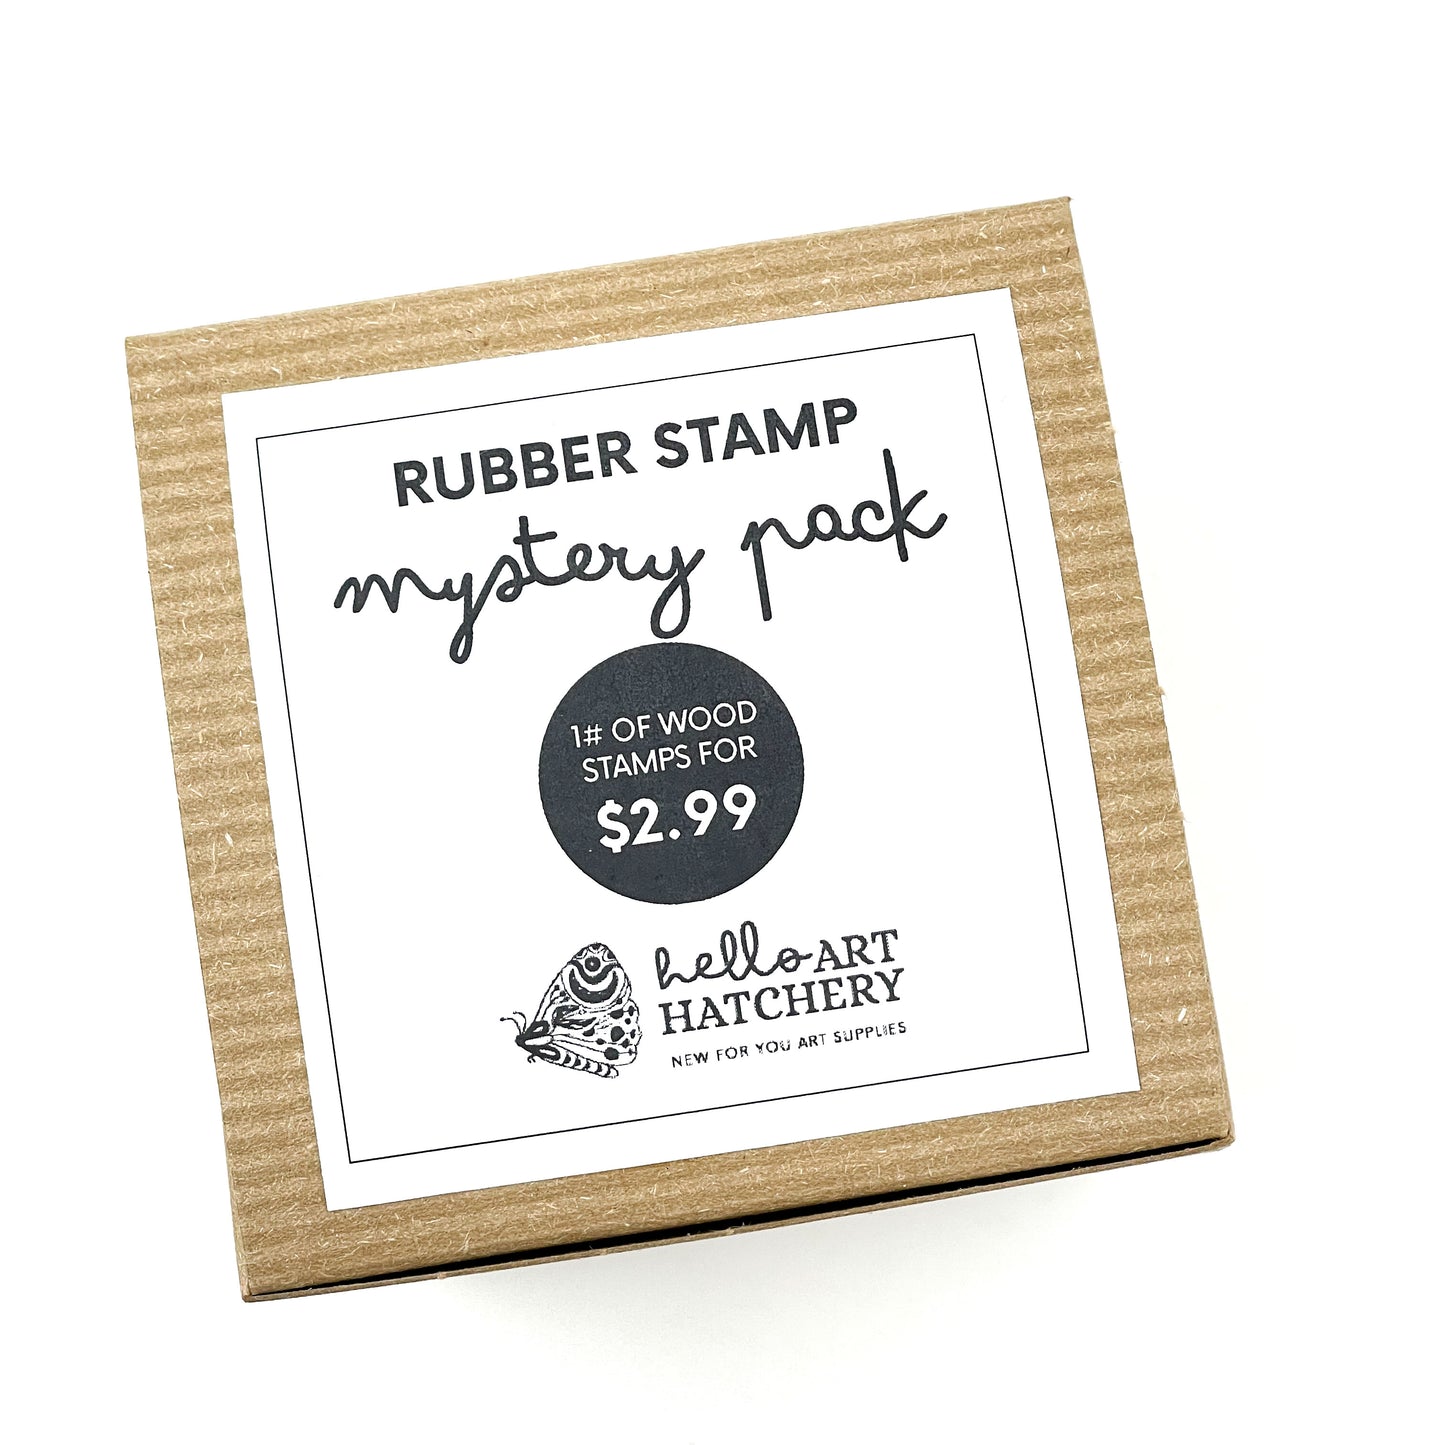 Rubber Stamp Mystery Box - One Pound